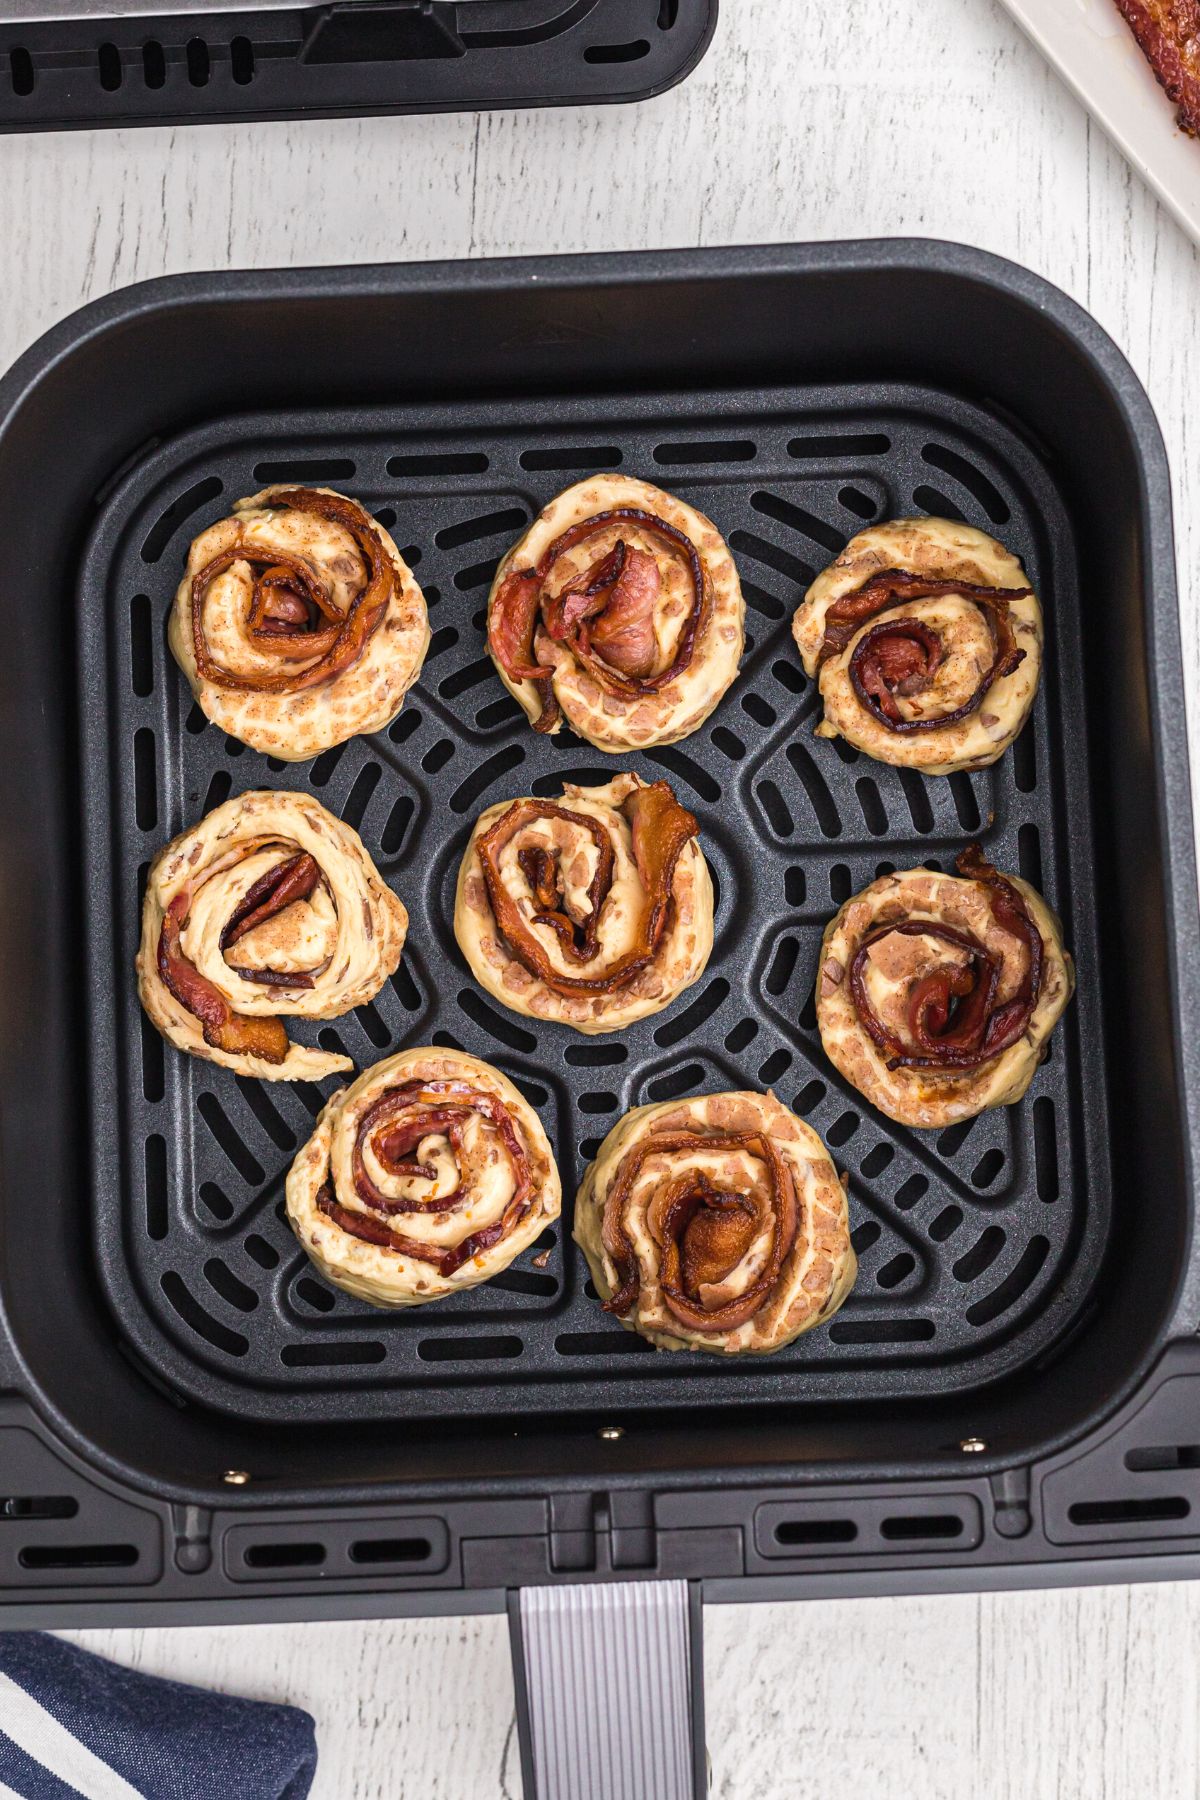 Uncooked cinnamon rolls wrapped around cooked bacon slices in the air fryer basket.